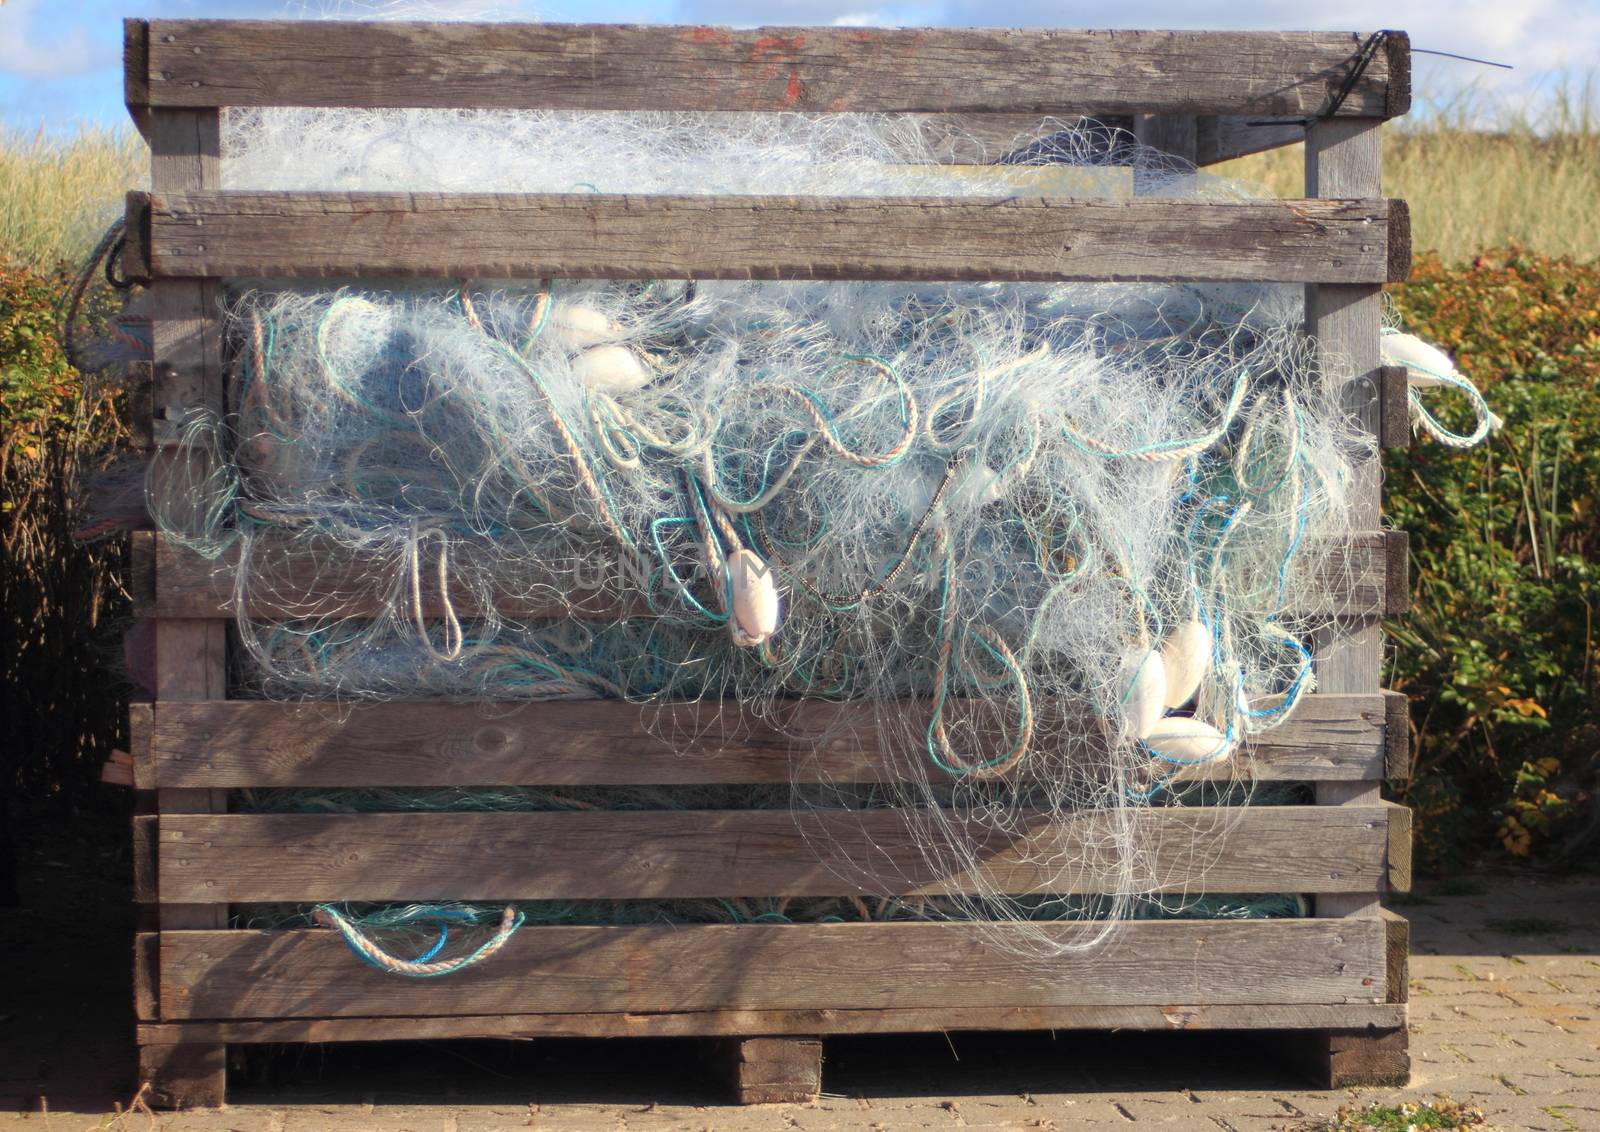 Blue industry fishing nets in old wooden storage box